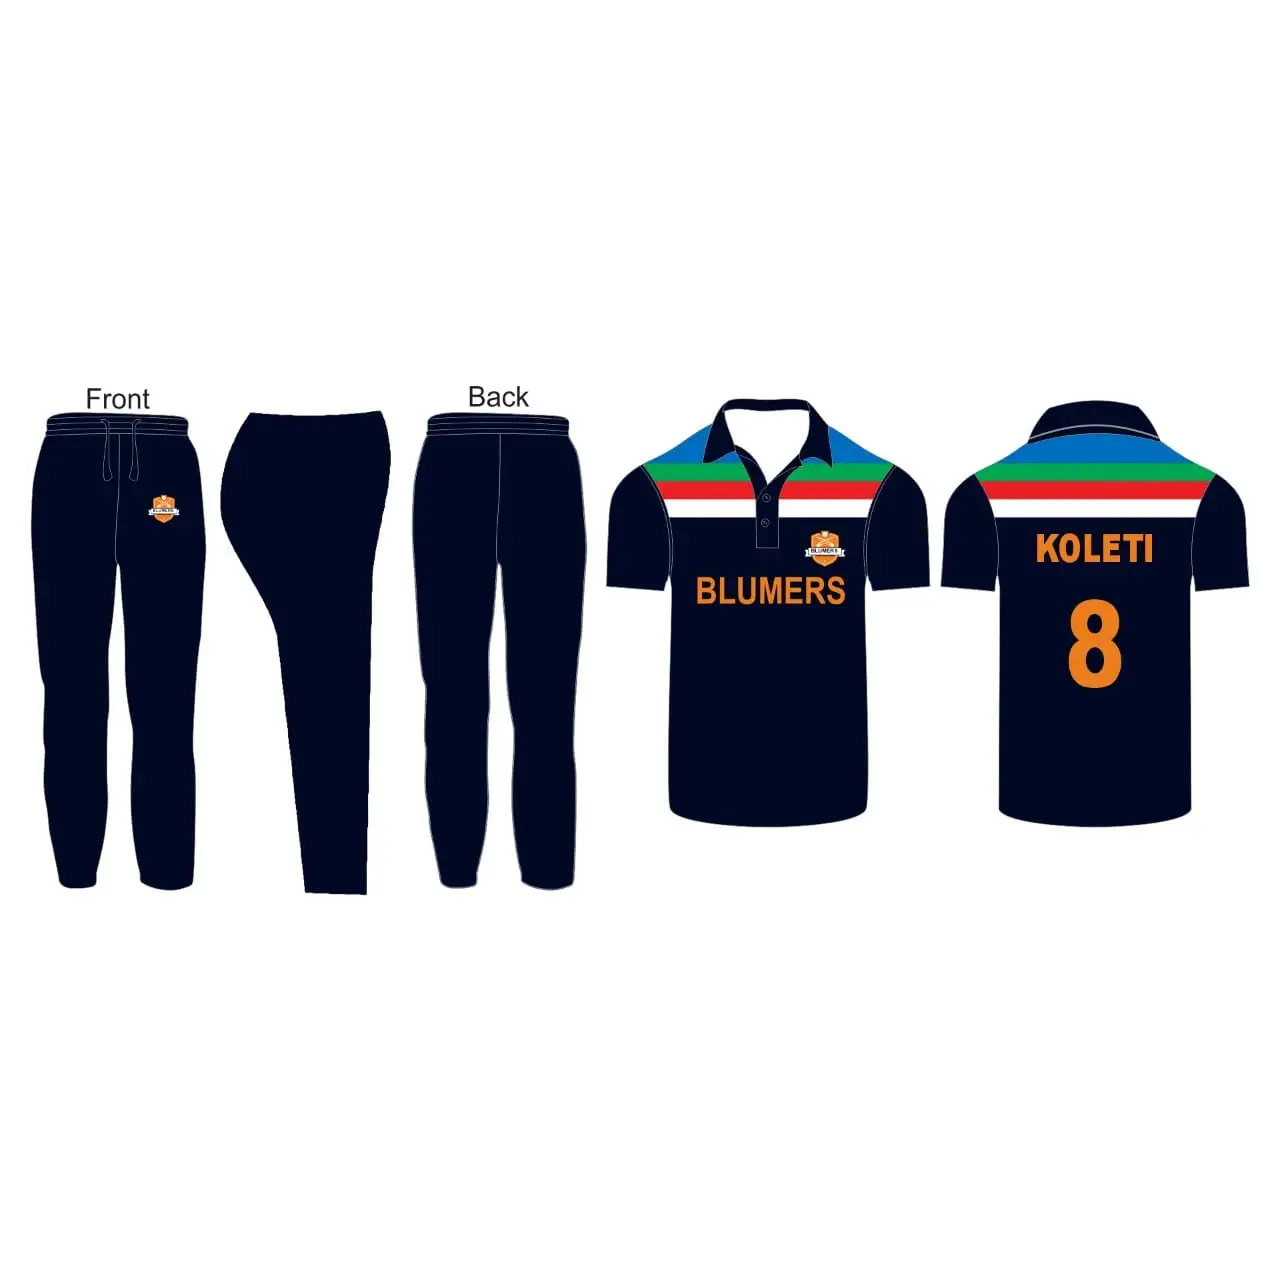 Cricket Shirt And Trouser Fully Customized With Player And Team Name Logo Number - Blue - Custom Cricket Wear 2PC Full